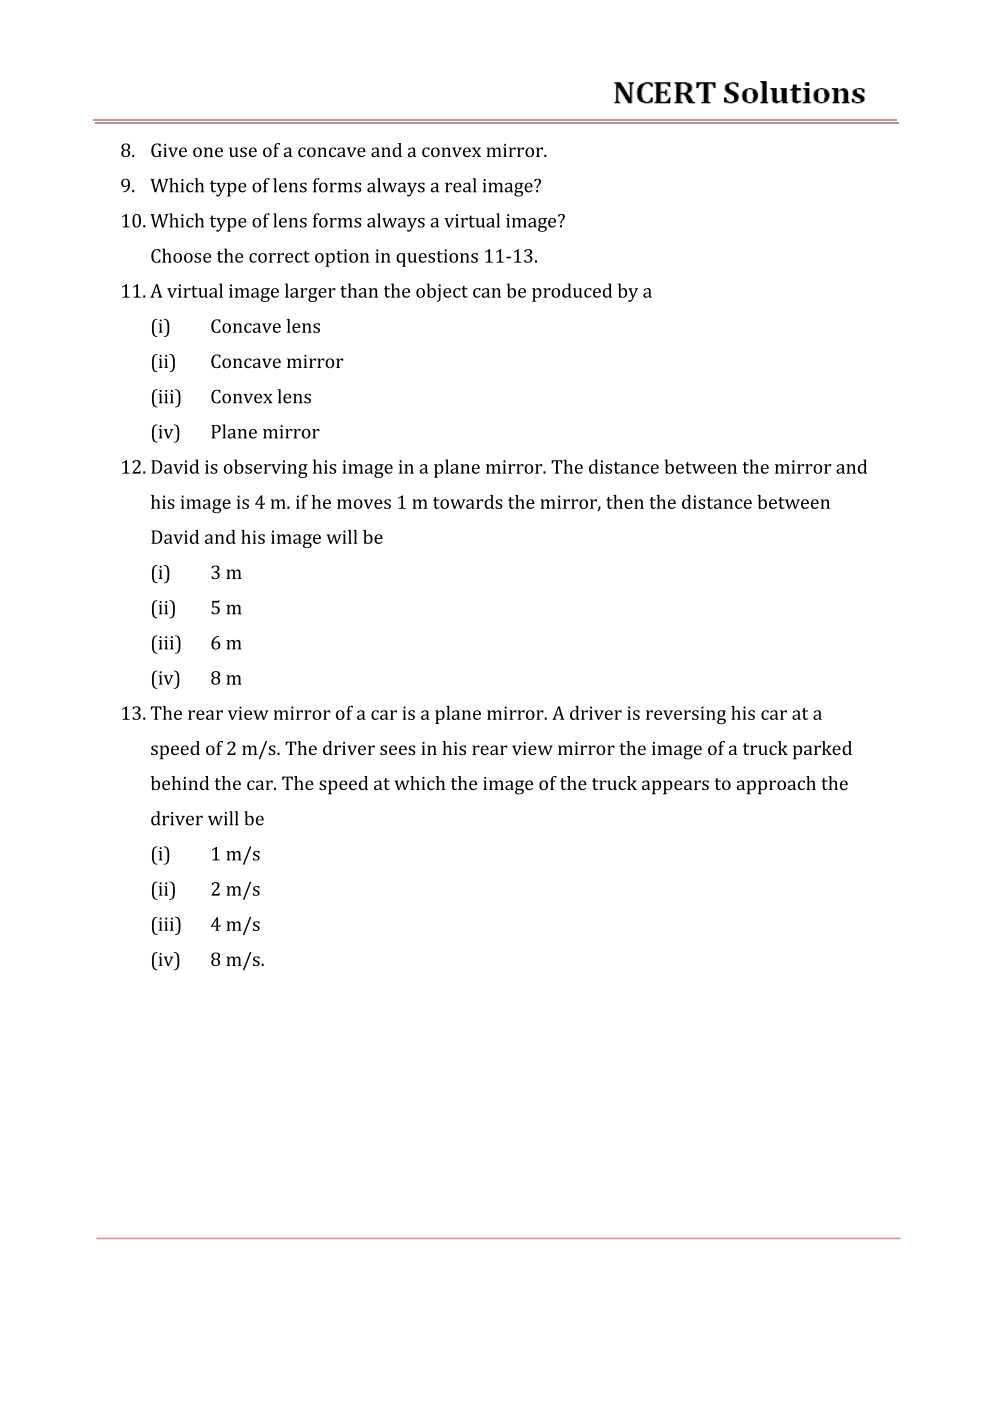 NCERT Solutions For Class 7 science Chapter 15 Light